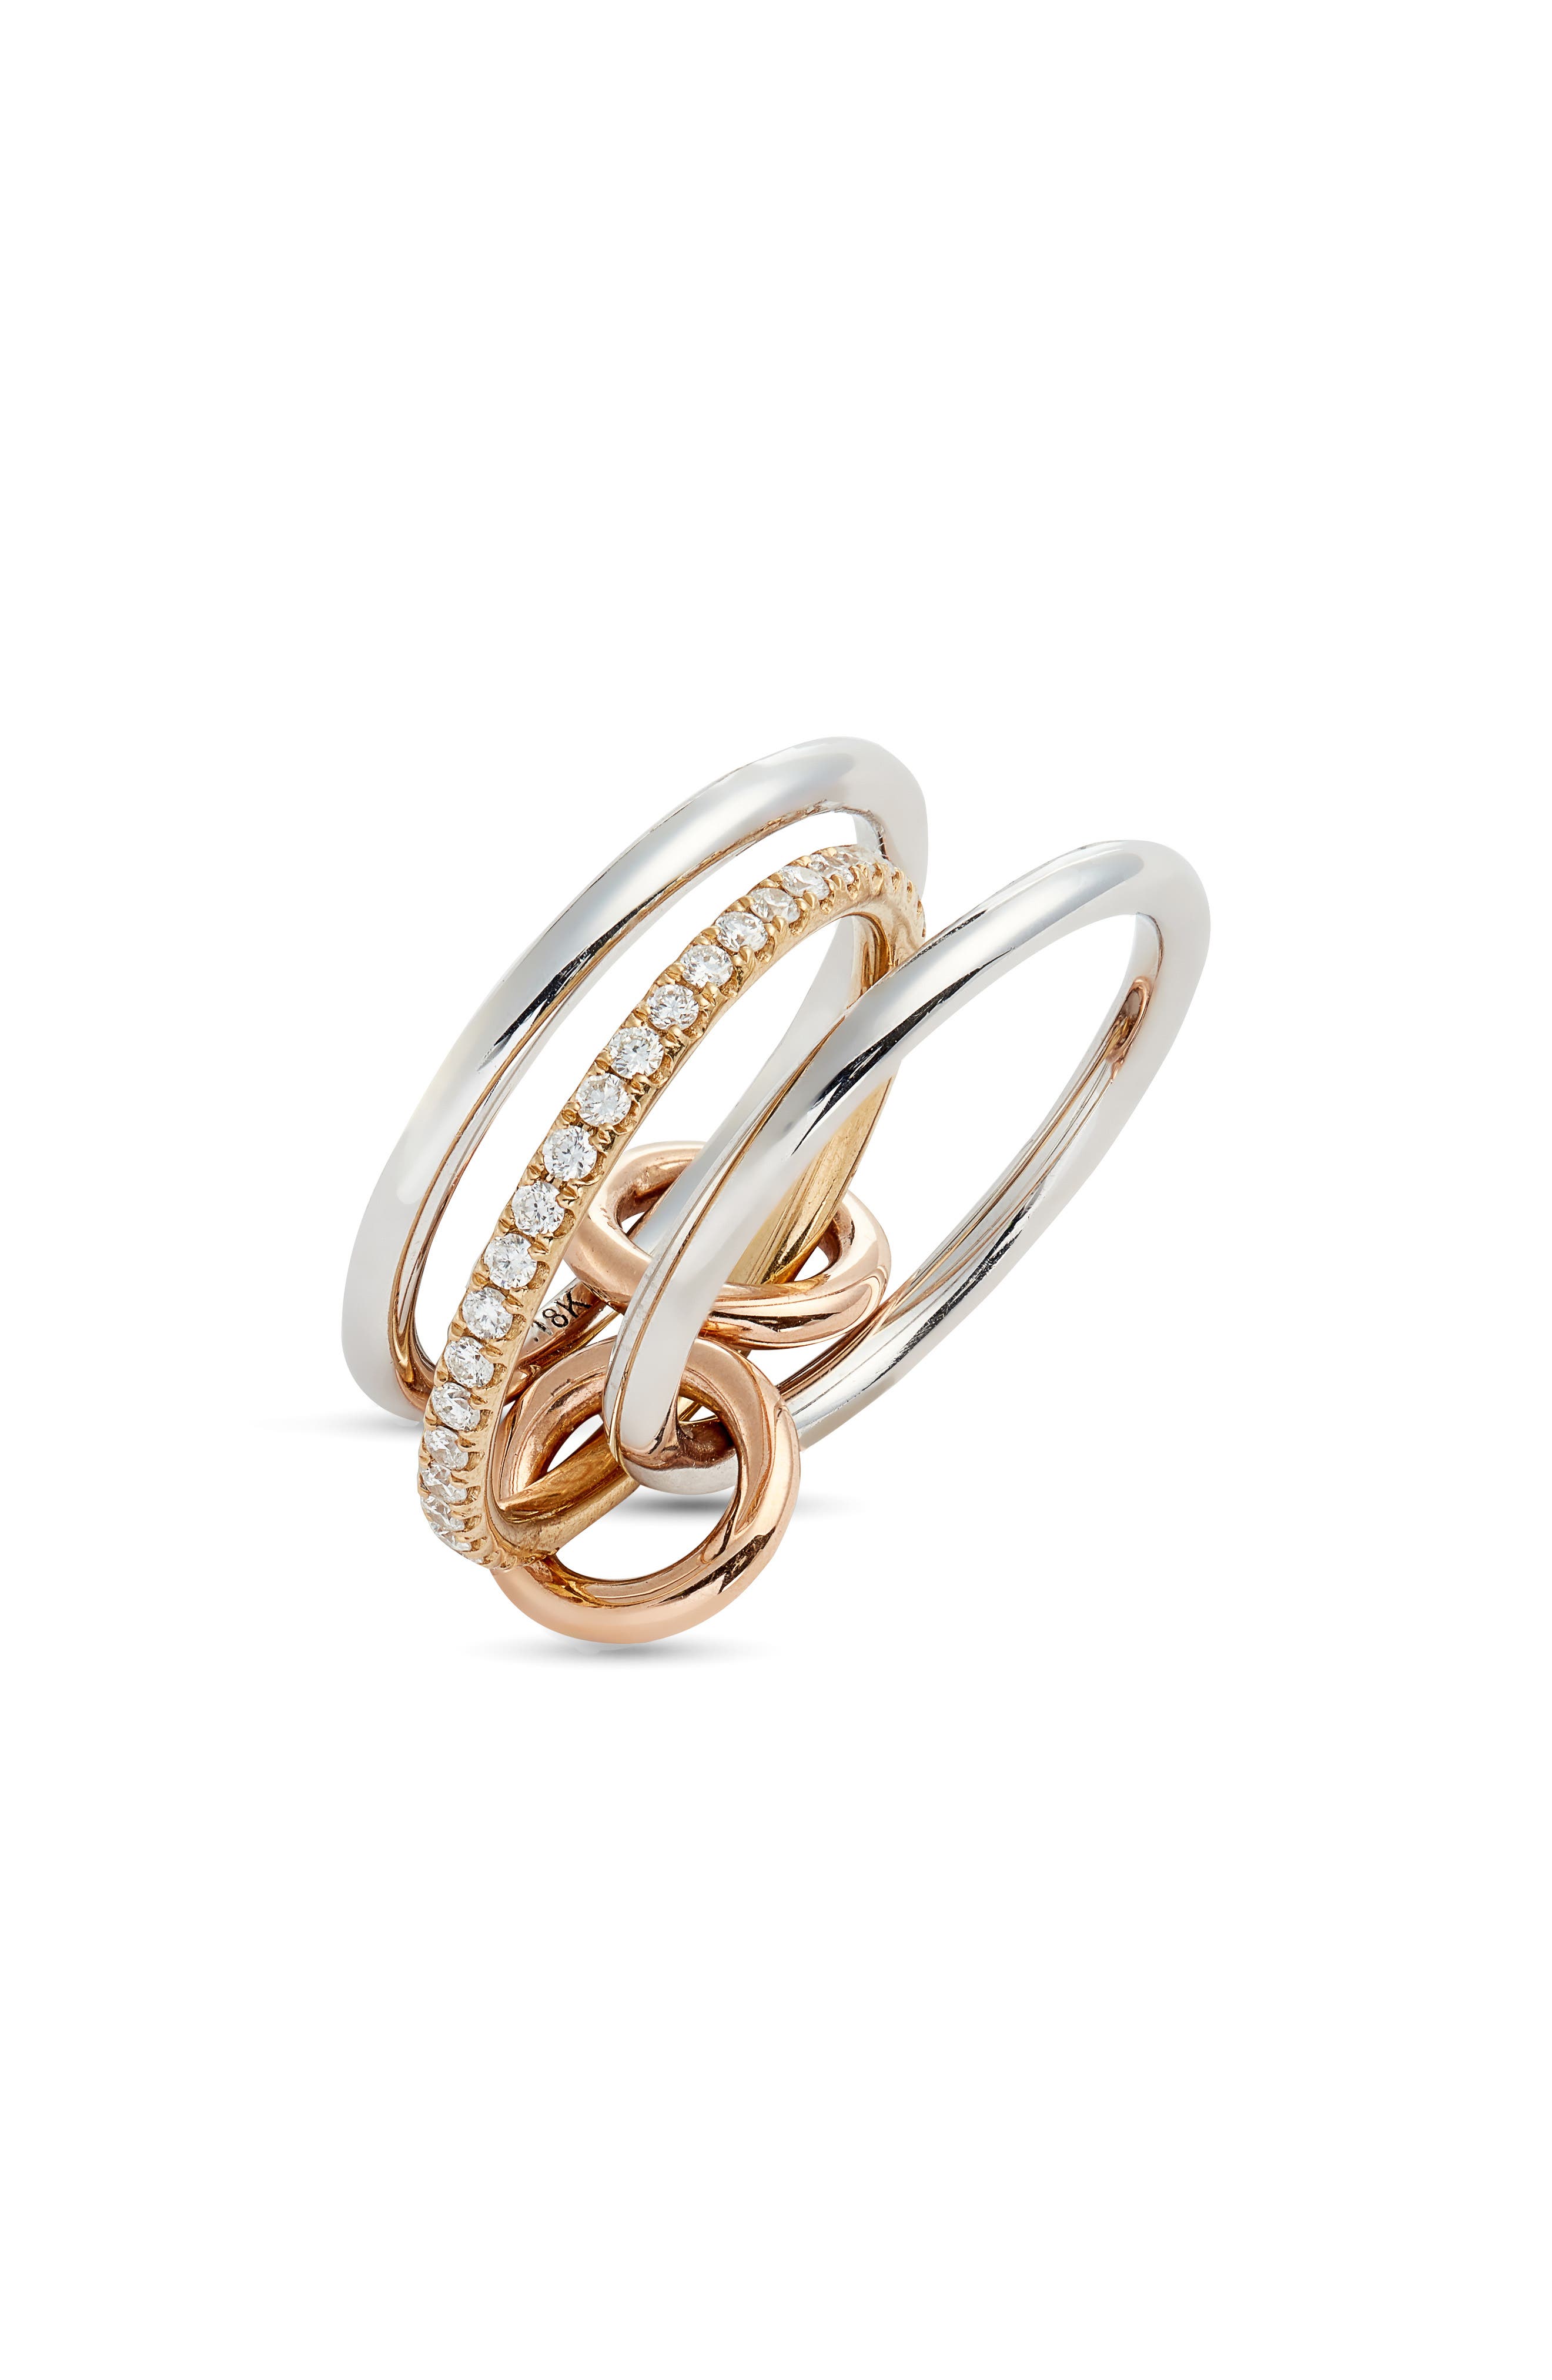 Spinelli Kilcollin 18K yellow gold linked rings